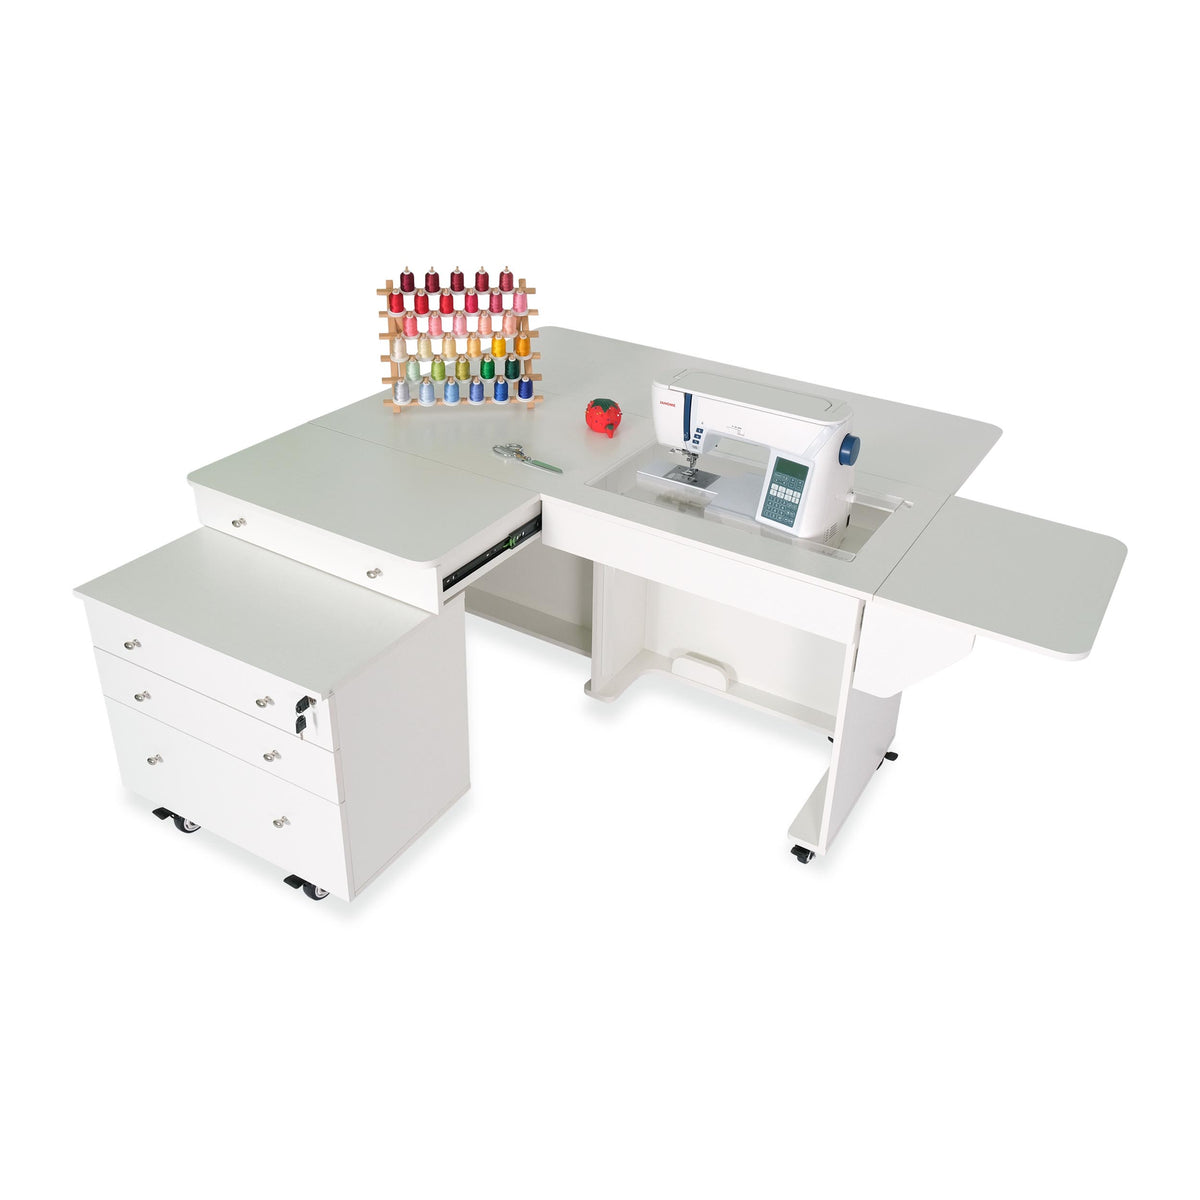 Kangaroo &amp; Joey Sewing and Quilting Cabinet